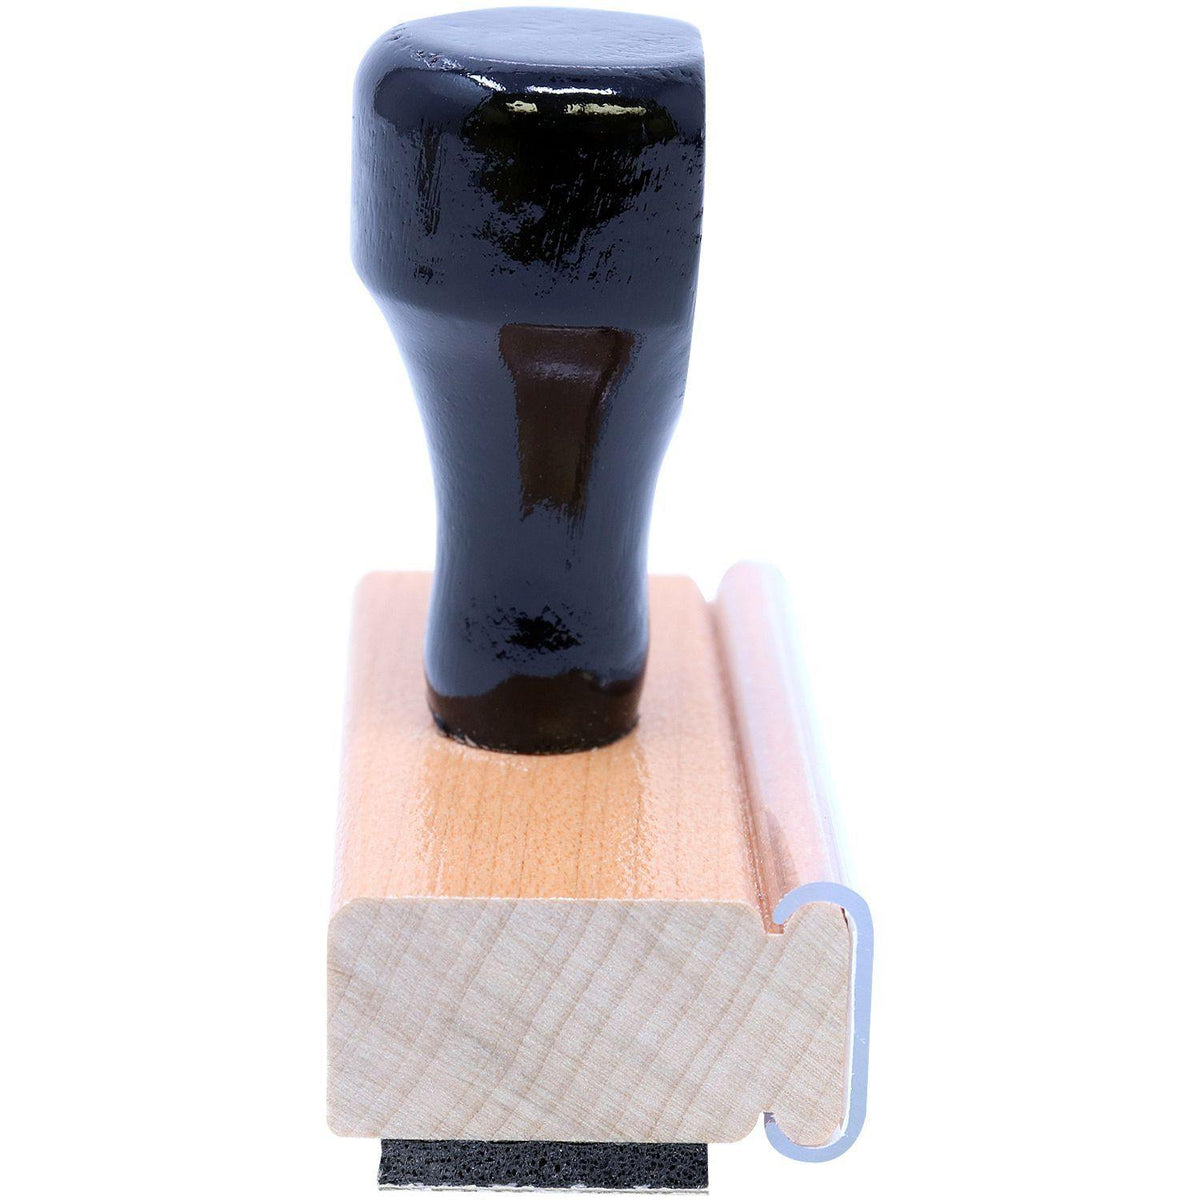 Round A+ Rubber Stamp - Engineer Seal Stamps - Brand_Acorn, Impression Size_Small, Stamp Type_Regular Stamp, Type of Use_Teacher